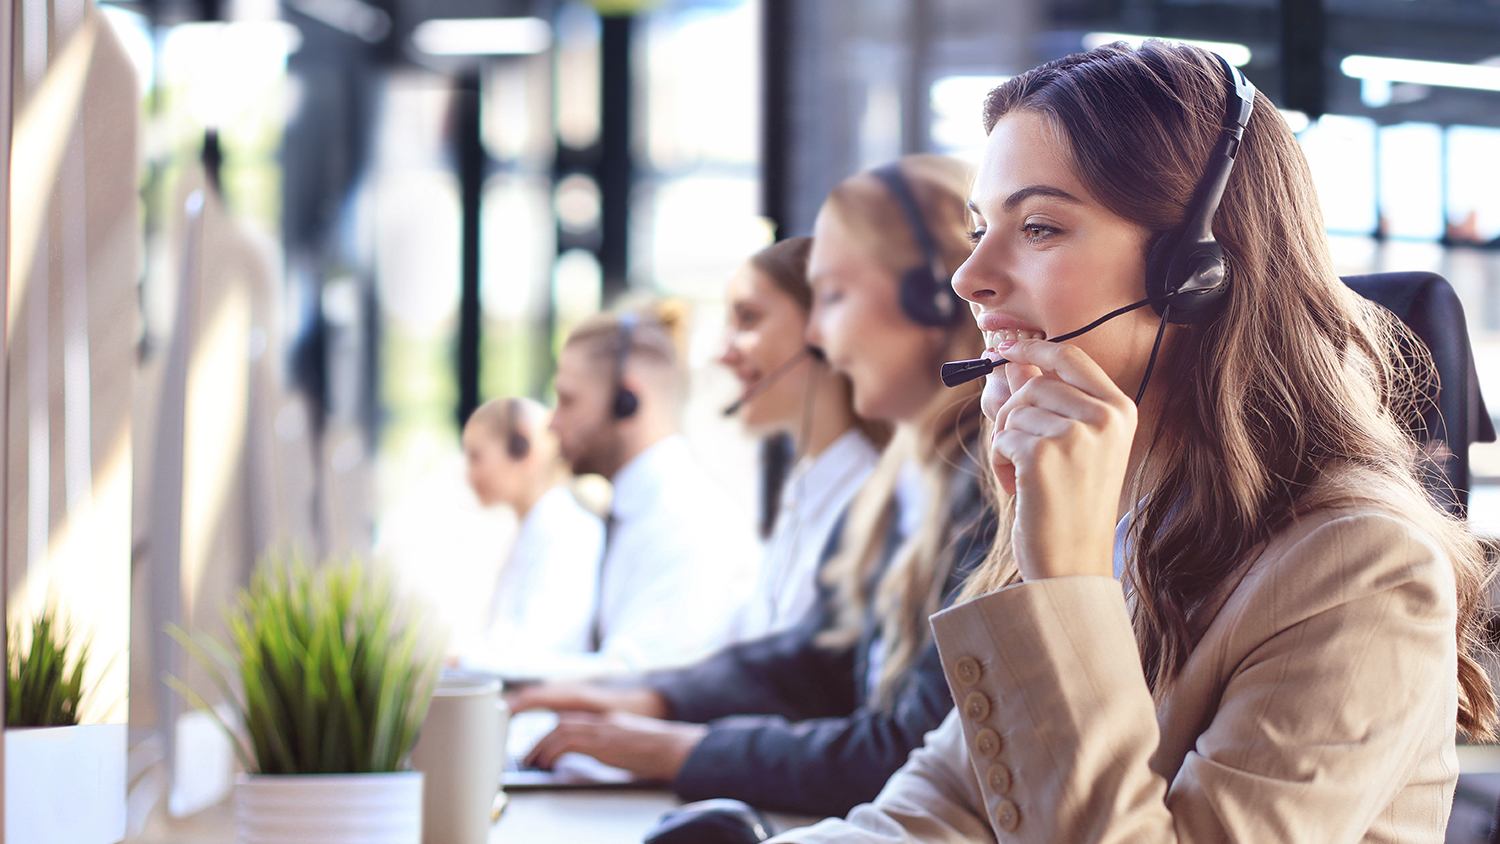 Additional Services for E-shops - Call center services - view of call center location, people on the phone with headsets